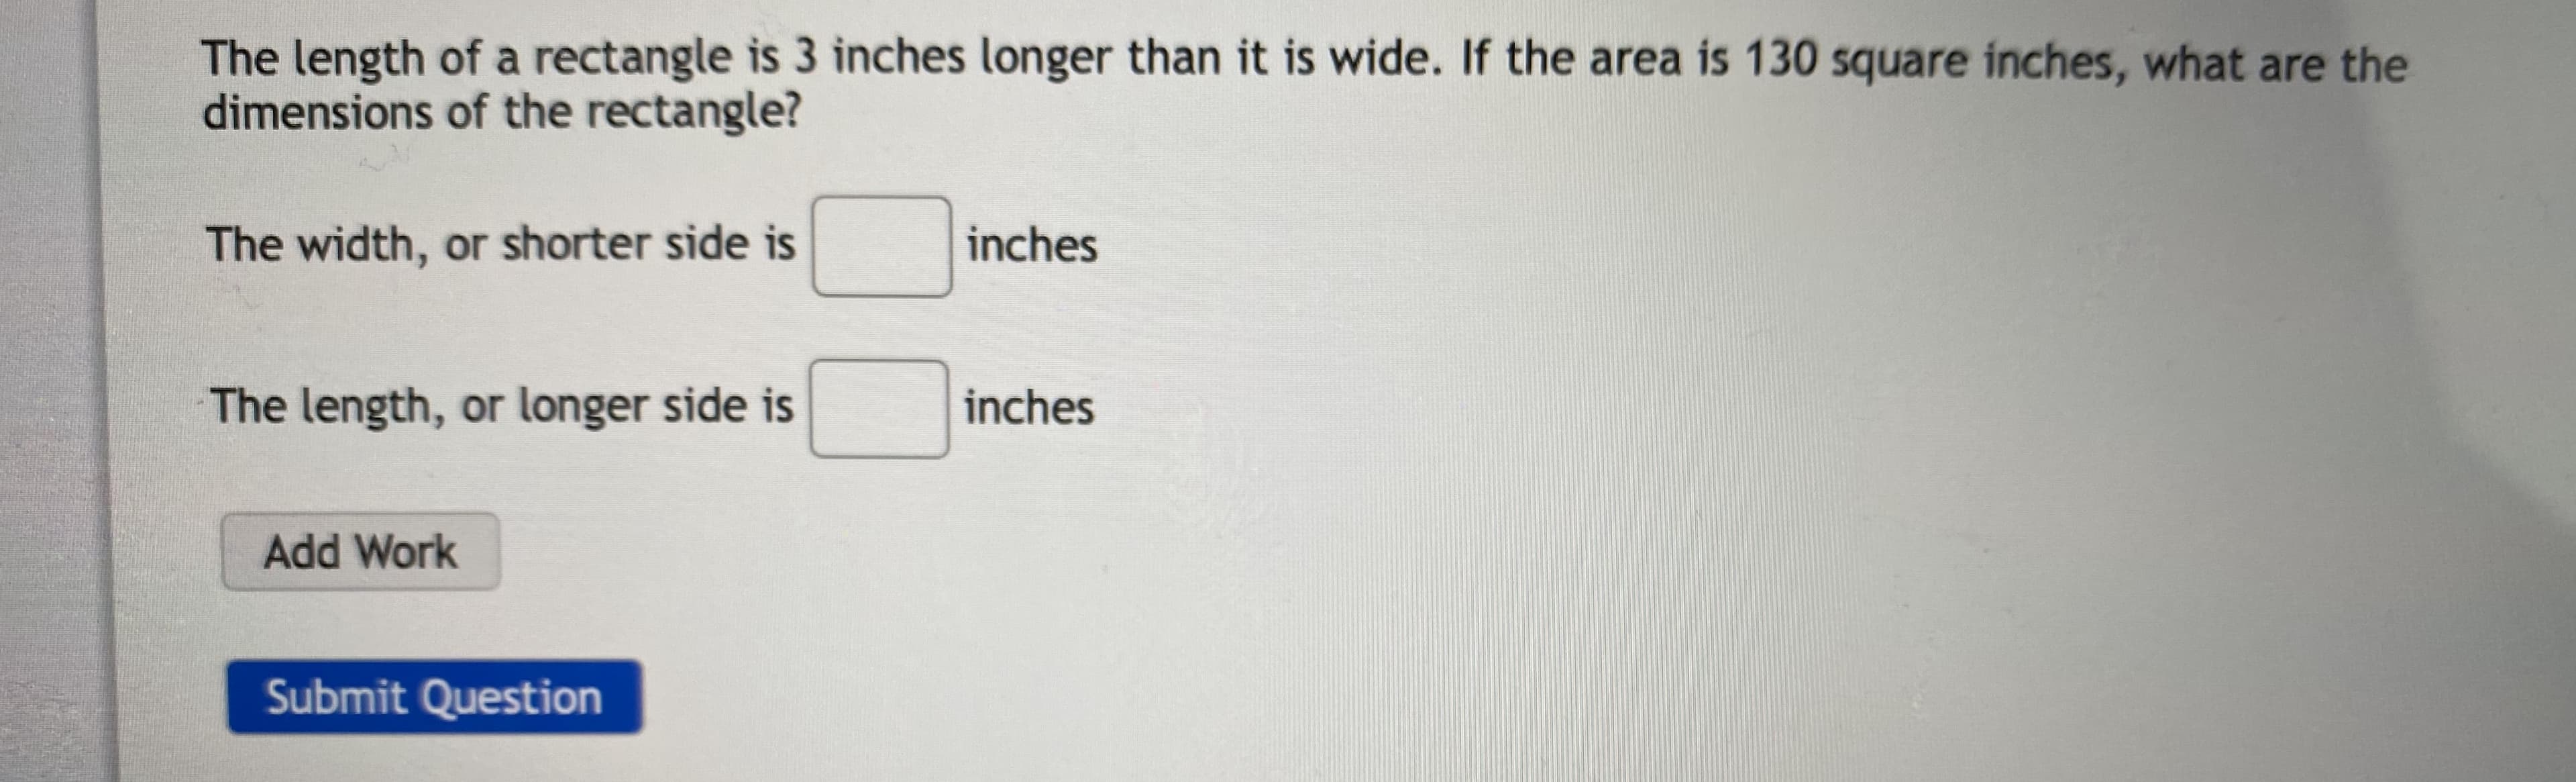 The length of a rectangle is 3 inches longer than it is wide. If the area is 130 square inches, what are the
dimensions of the rectangle?
